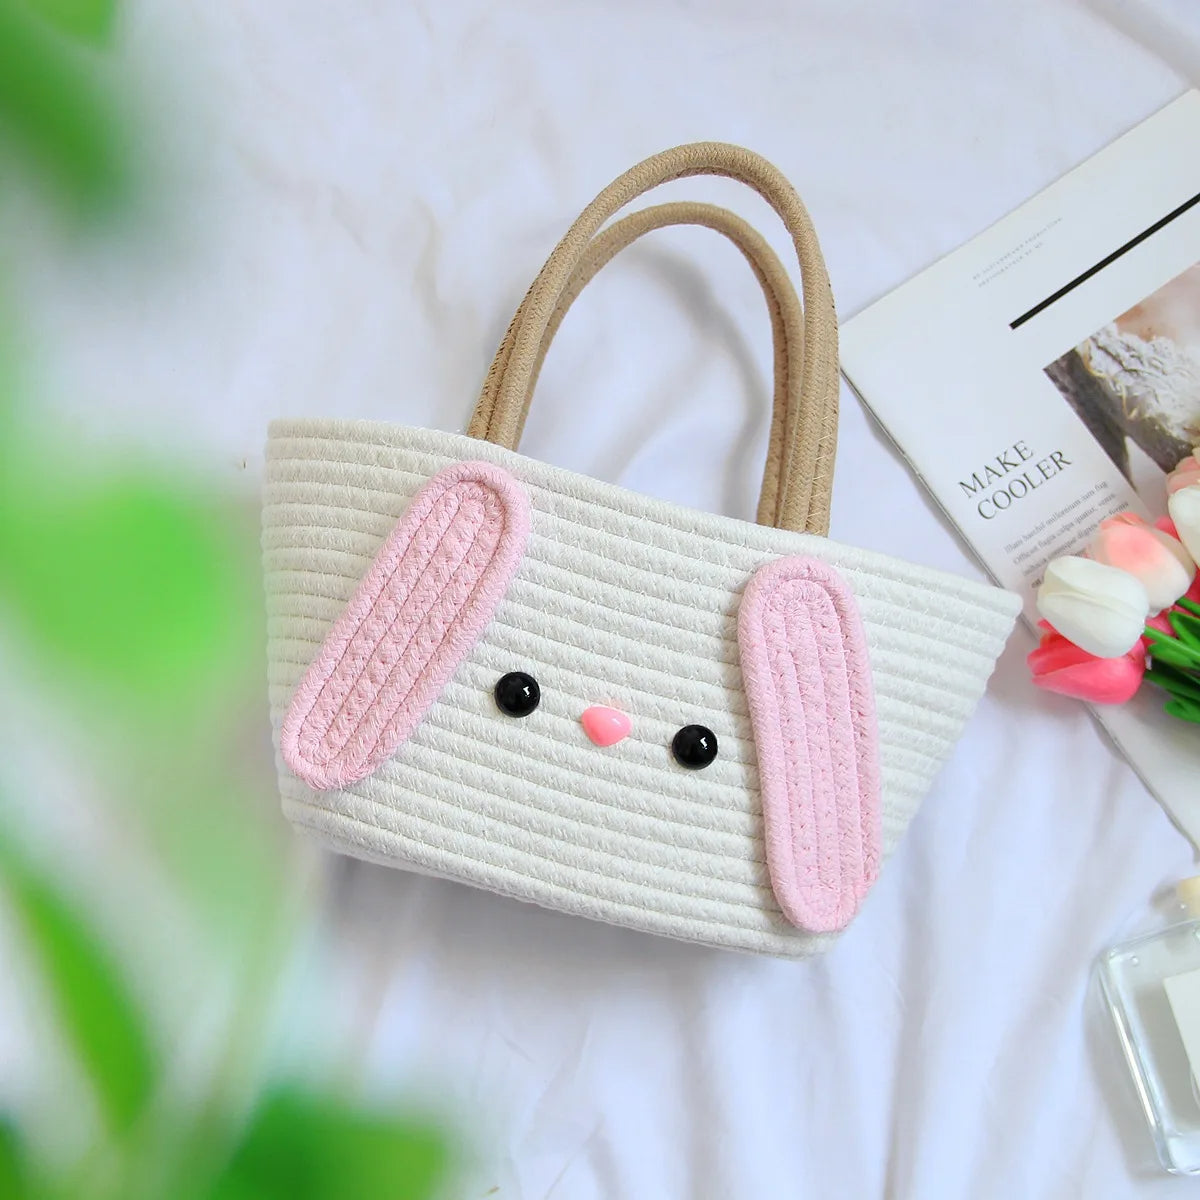 Super Cute Basket Woven With Cotton Rope (Pink)